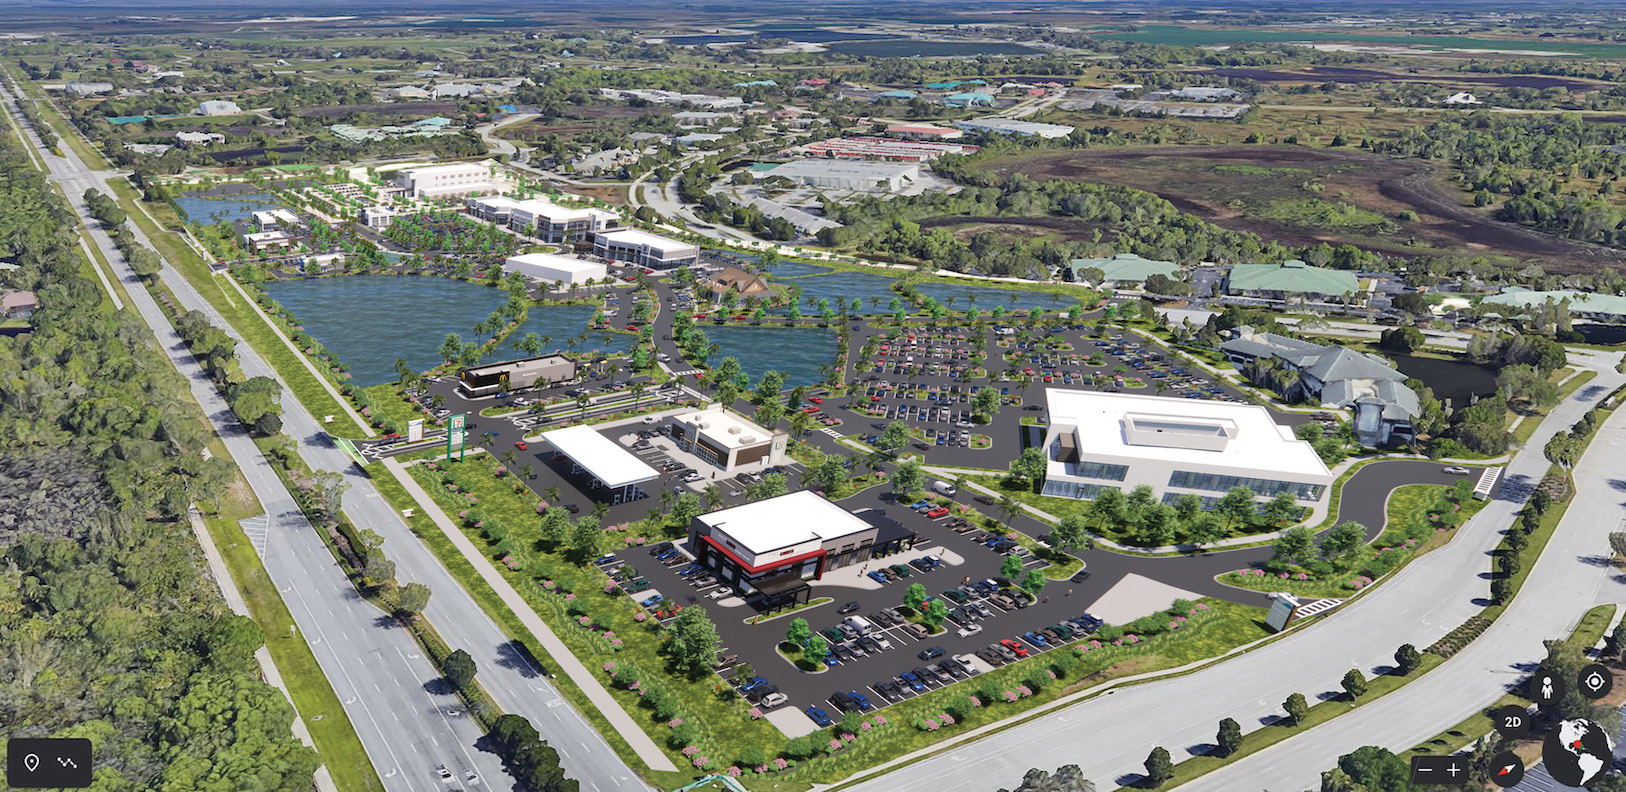 This is a look at what's to come at Center Point at Lakewood Ranch. Center Point will feature 250,000 square feet of retail space, three specialty restaurants and much more when completed in 2023. Graphic Provided.